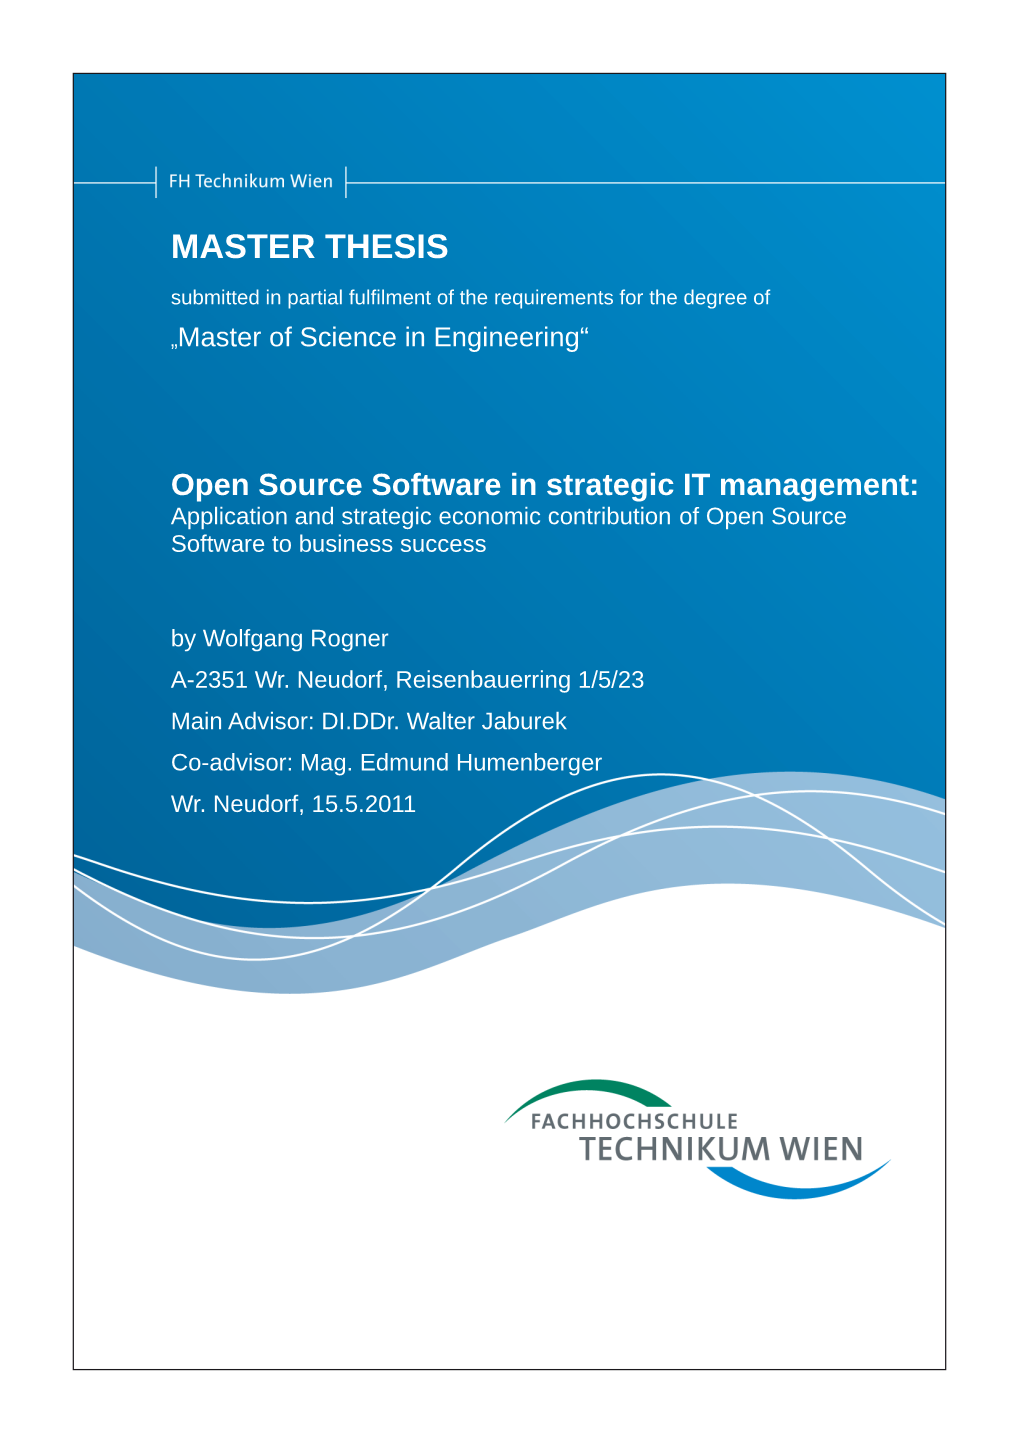 Open Source Software in Strategic IT Management